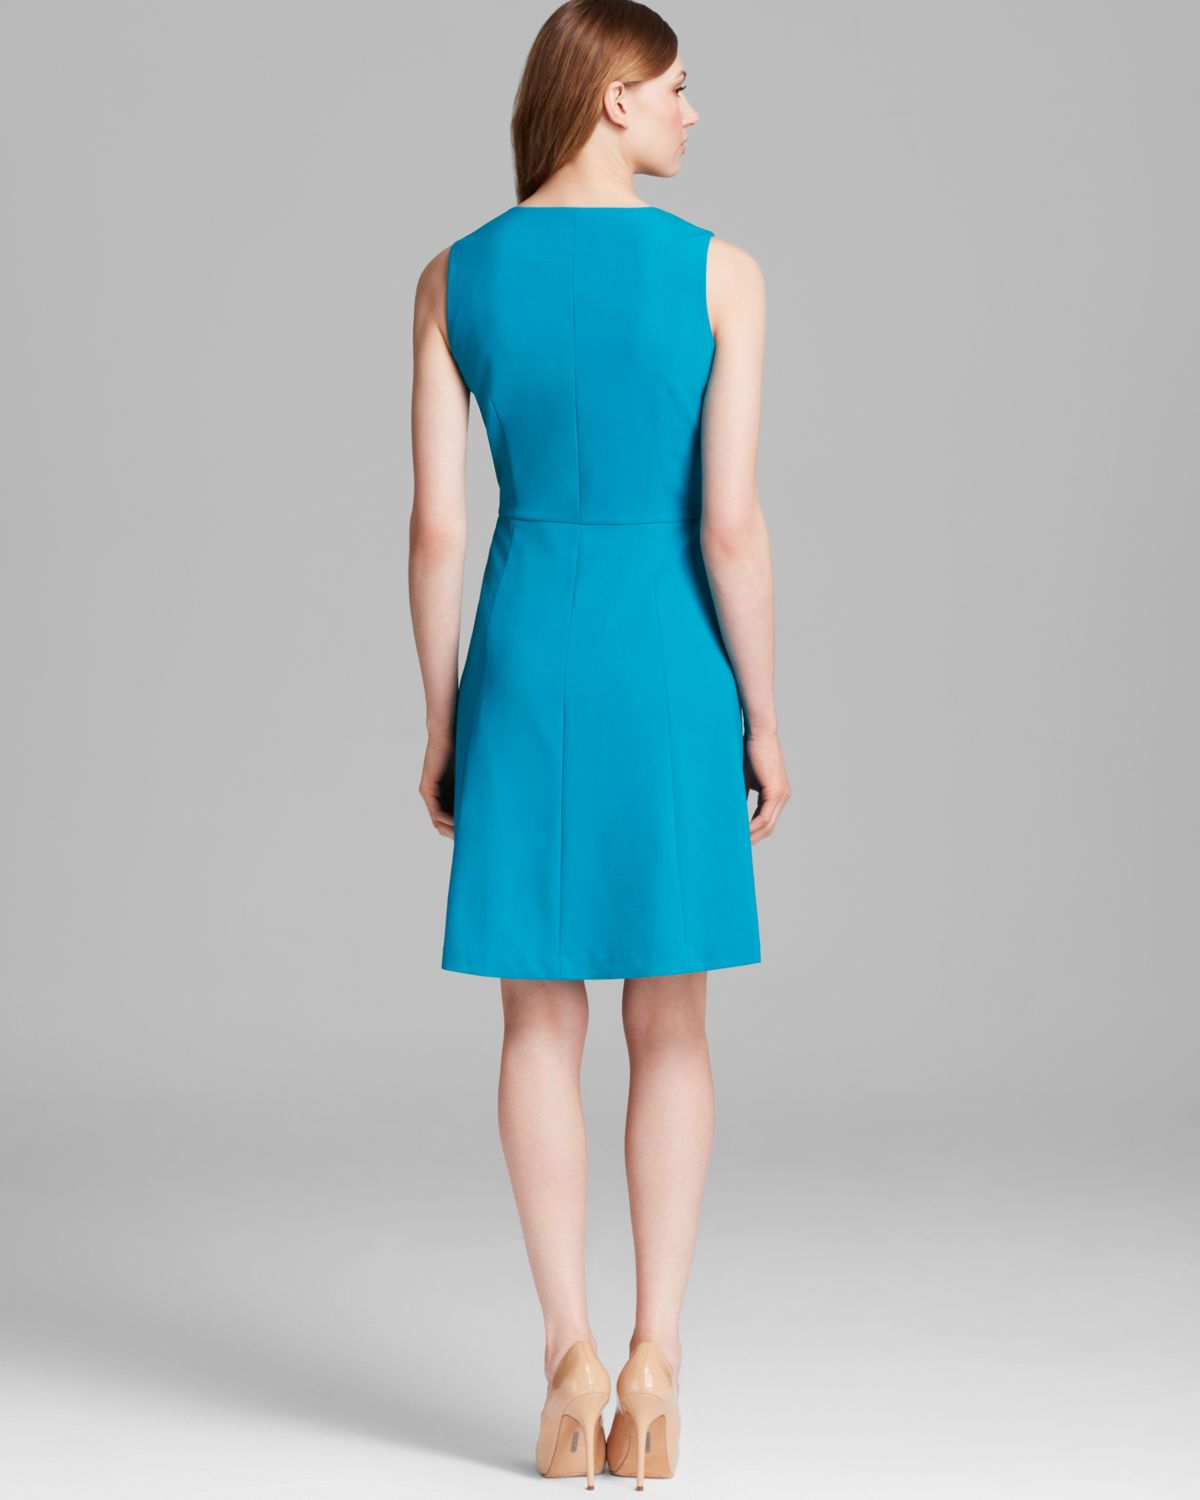 Lyst - Calvin Klein Zip Front Fit and Flare Dress in Blue